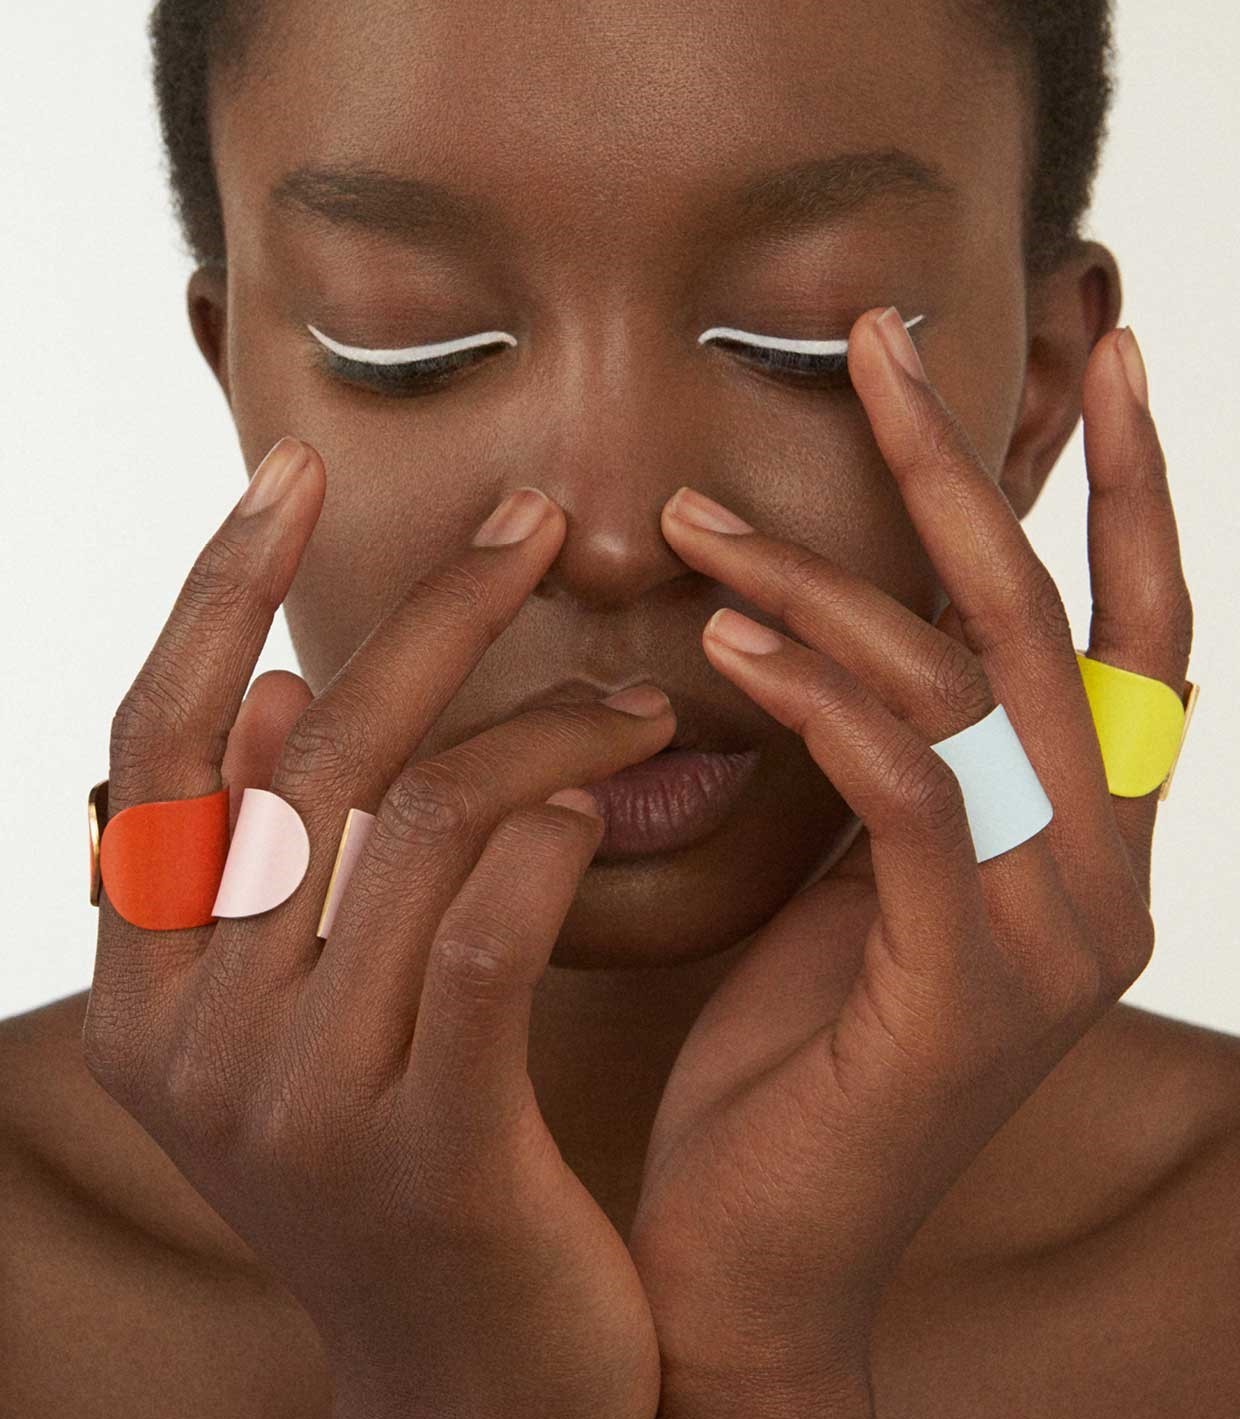 midnight-charm:Nicole Atieno photographed by Mark Pillai for Uncommon Matters Jewelry